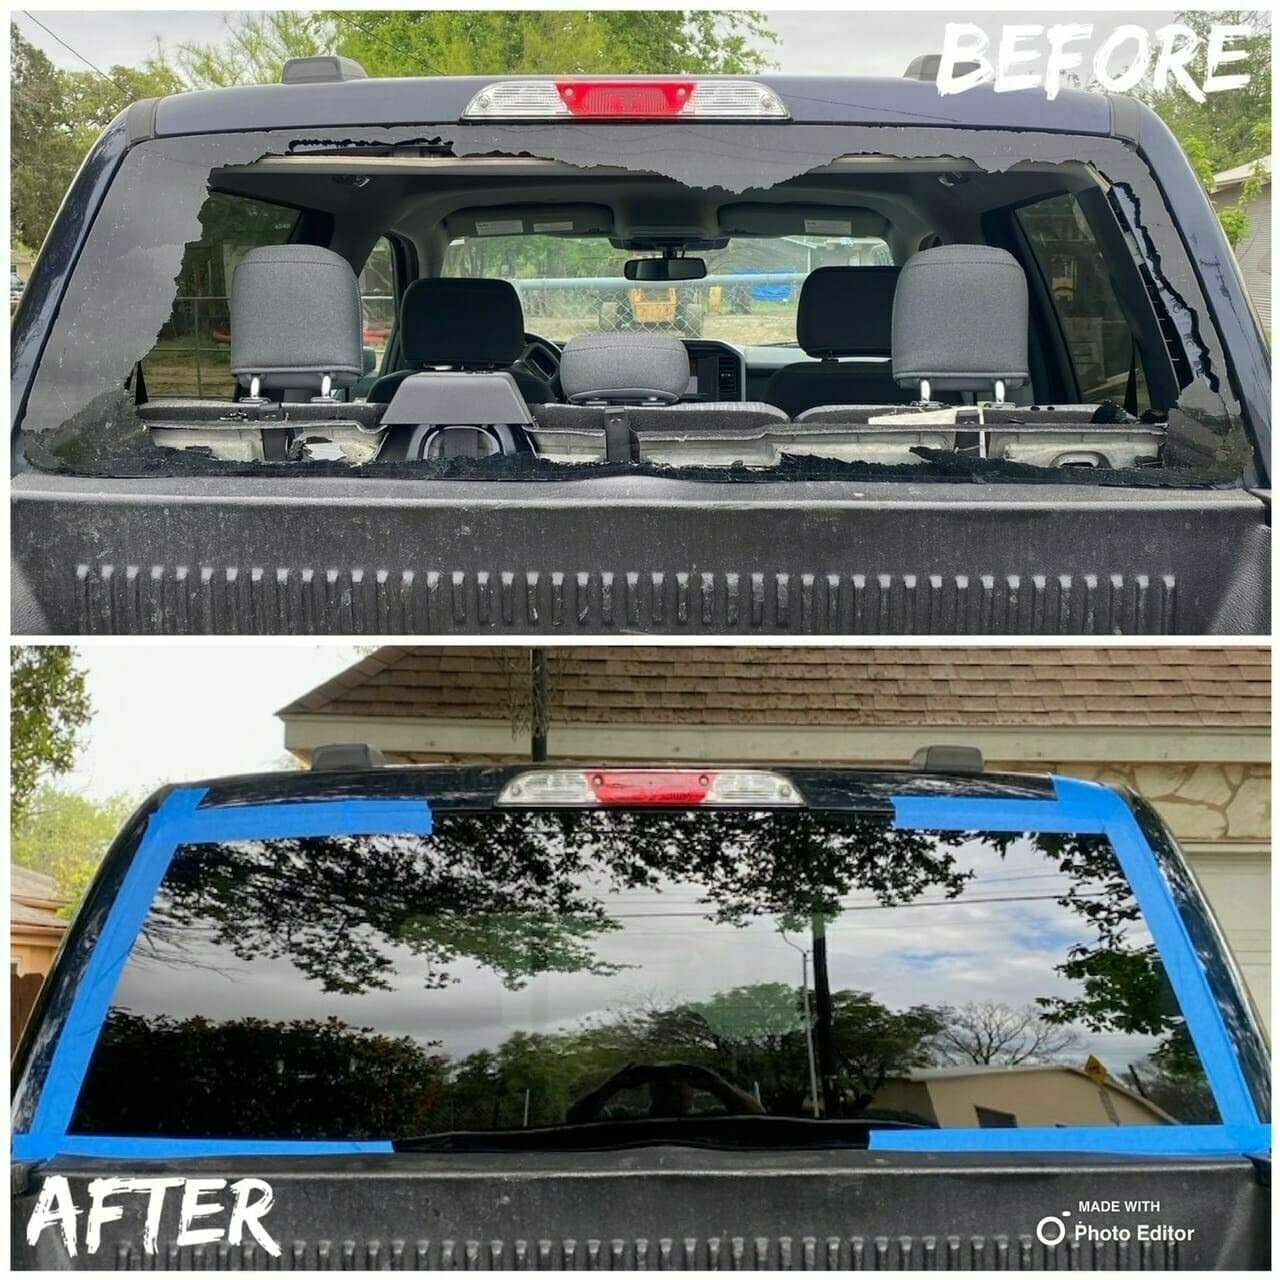 This before and after image highlights the transformation of a crew cab pickup truck's driver side left front laminated door glass in New Braunfels, Texas. The top half features the damaged door glass with broken shards and cracks from an attempted break-in. The bottom half presents the same pickup truck after the repair, showcasing a newly installed, clear, and intact door glass, emphasizing the effectiveness of our door glass replacement service in the New Braunfels area.